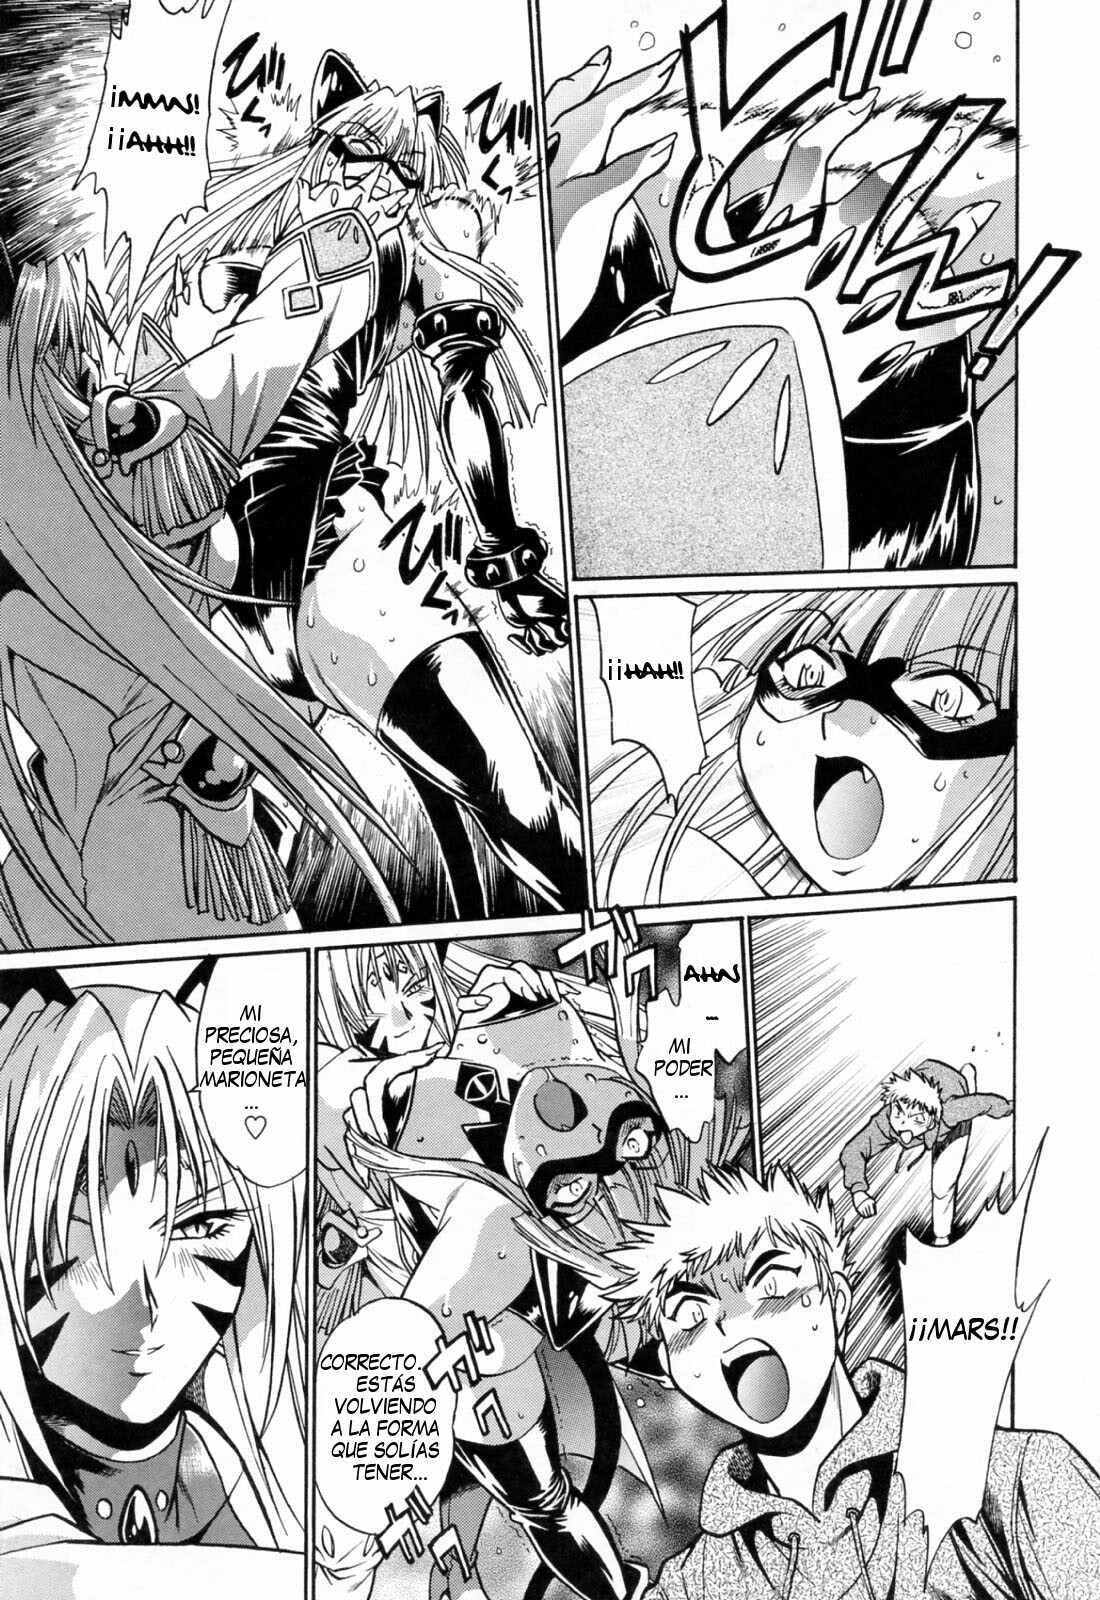 [Manabe Jouji] Tail Chaser 3 [Spanish] [CHMOD -R 777] page 41 full